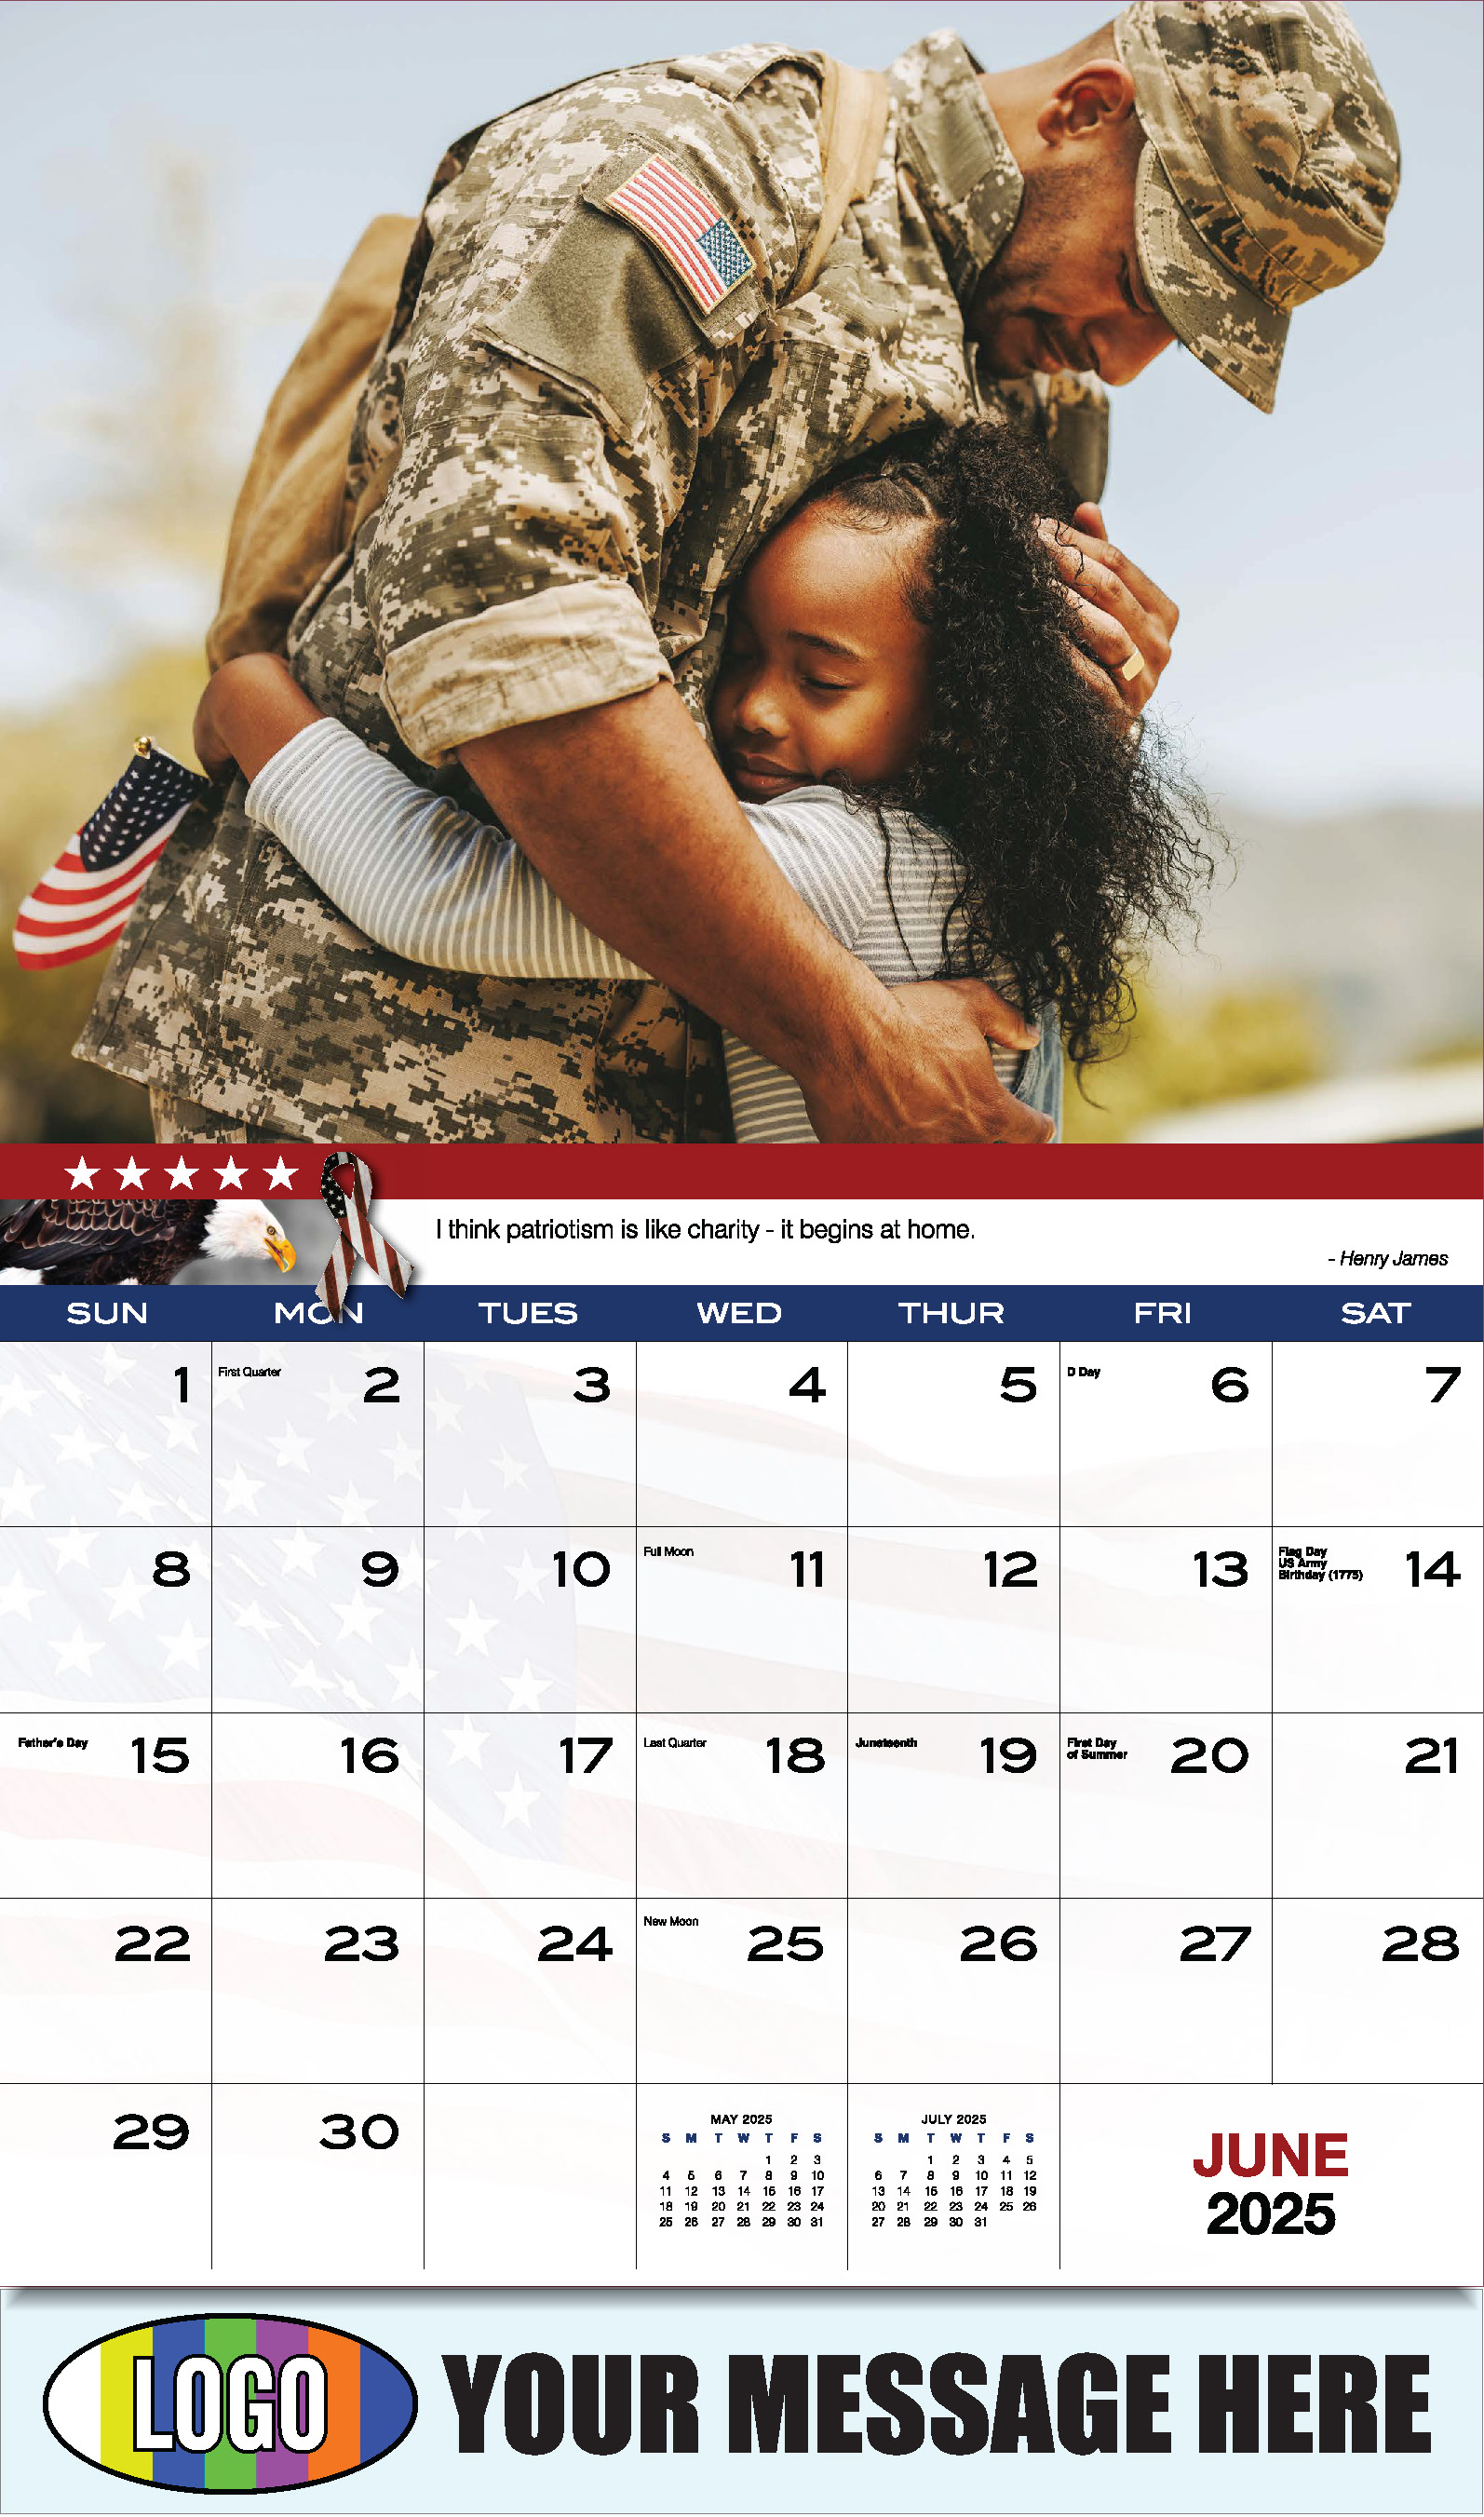 Home of the Brave 2025 USA Armed Forces Business Promo Calendar - June